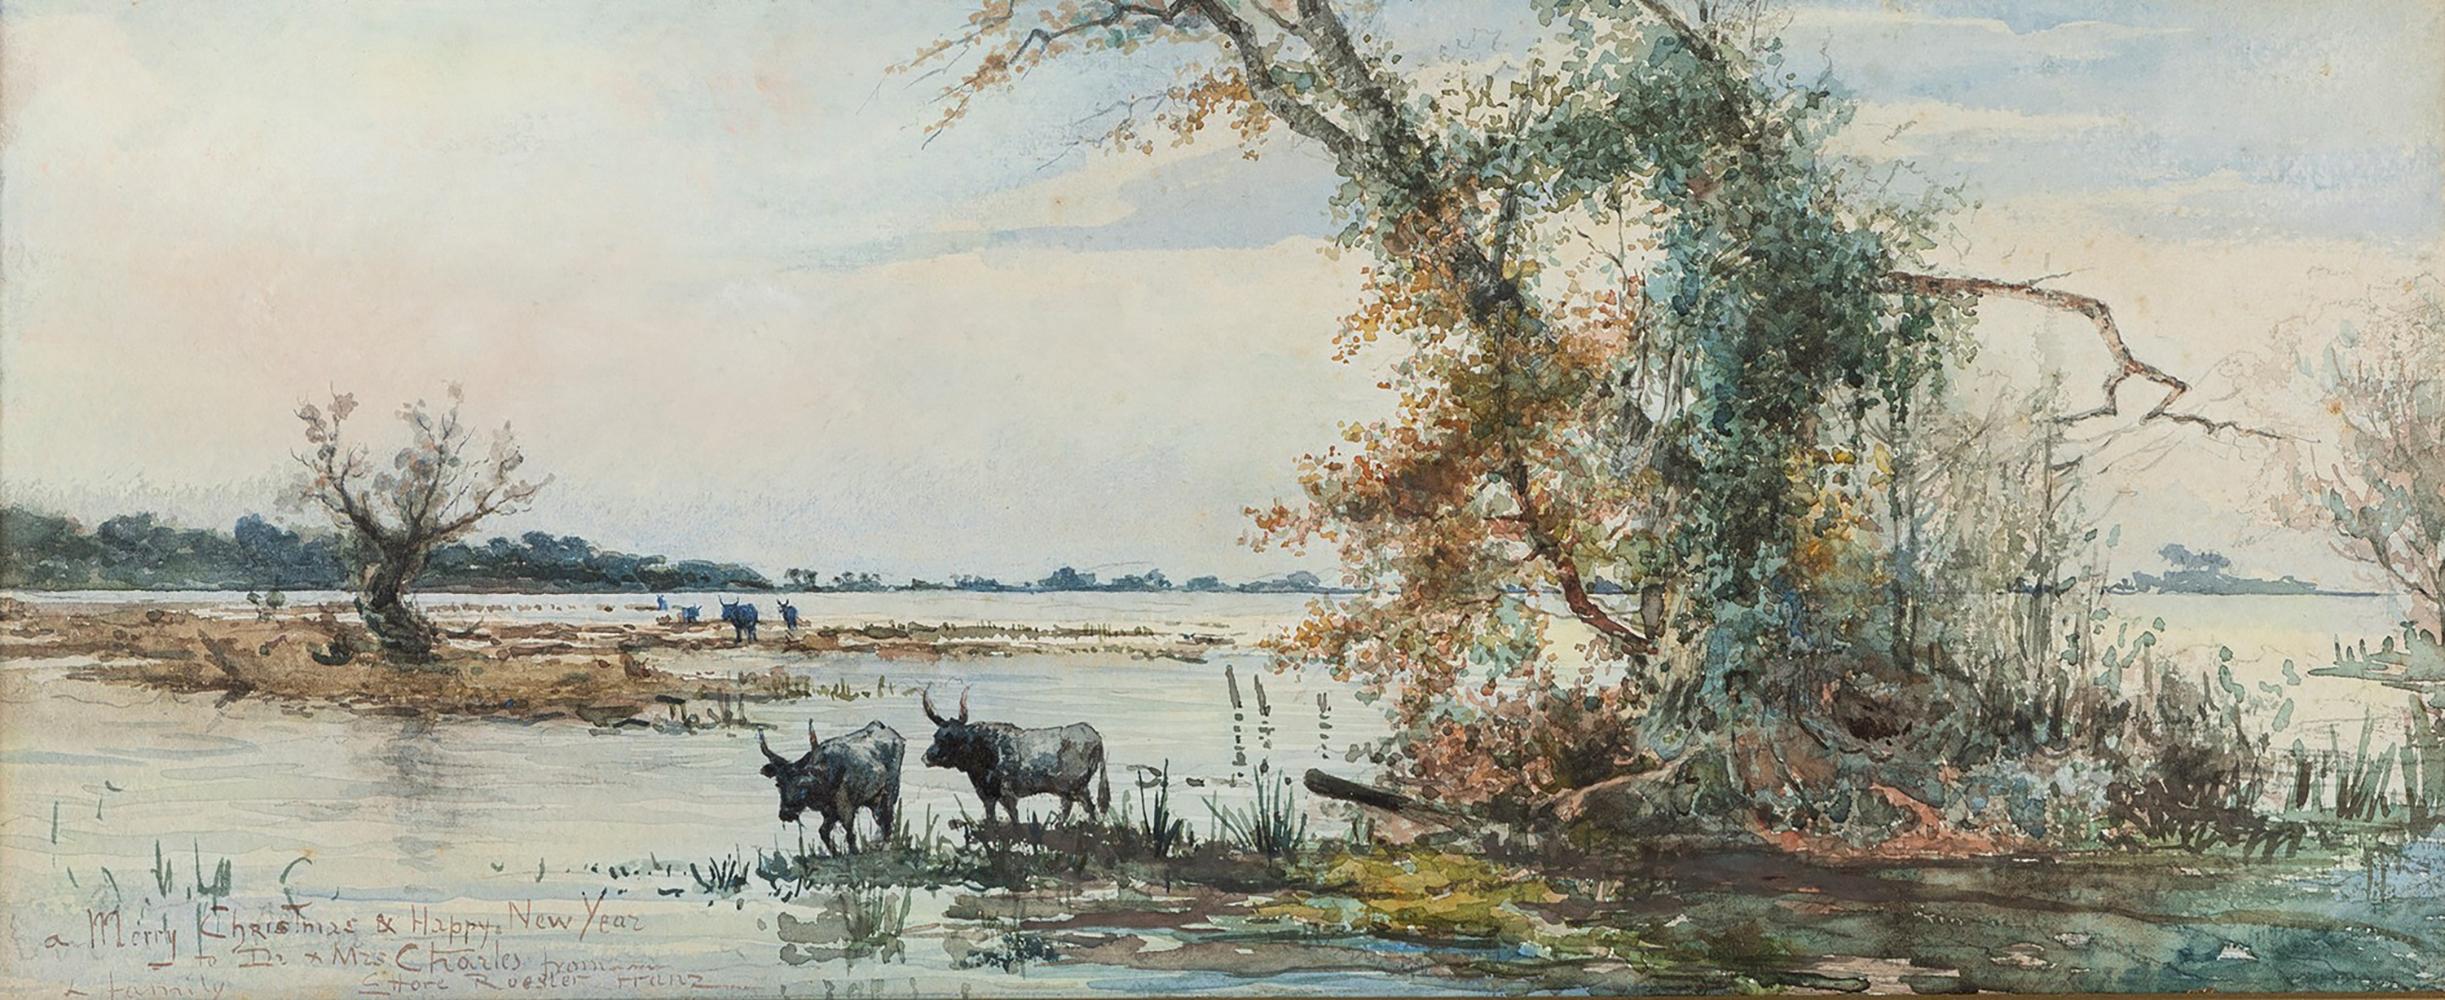 "Buffaloes in the swamp" by Ettore Roesler Franz